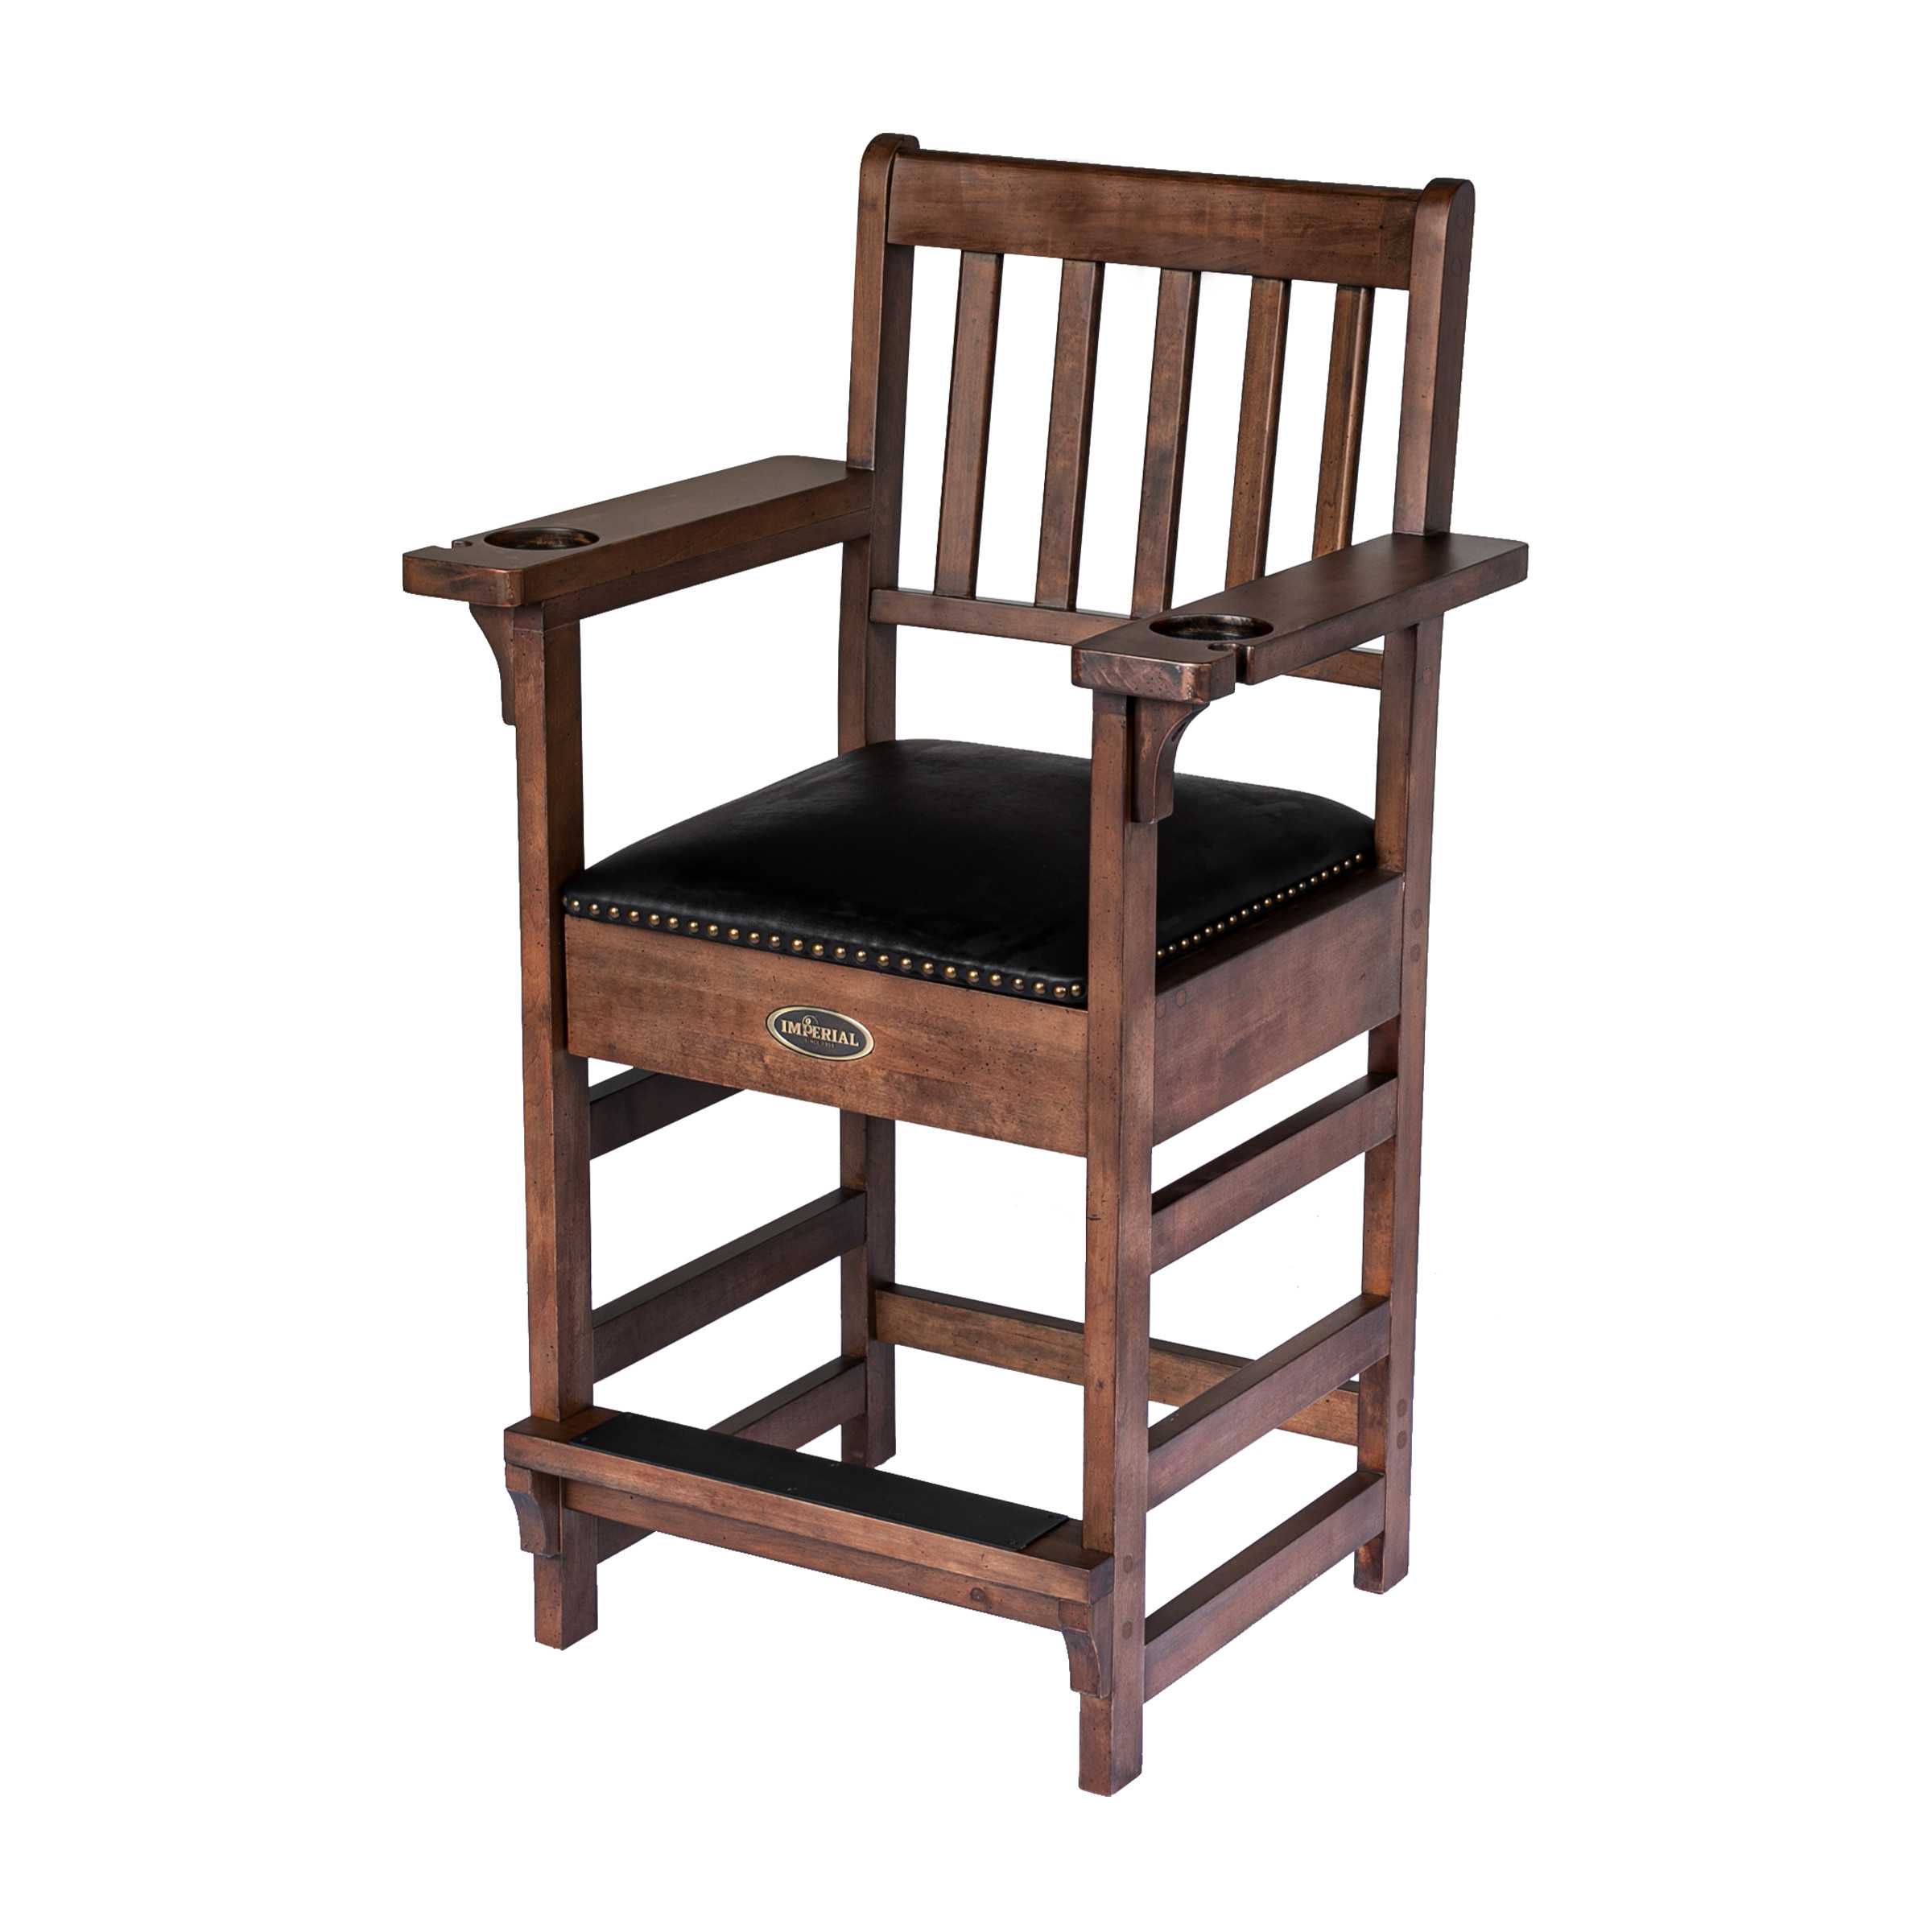 PREMIUM SPECTATOR CHAIR WITH DRAWER WHISKEY